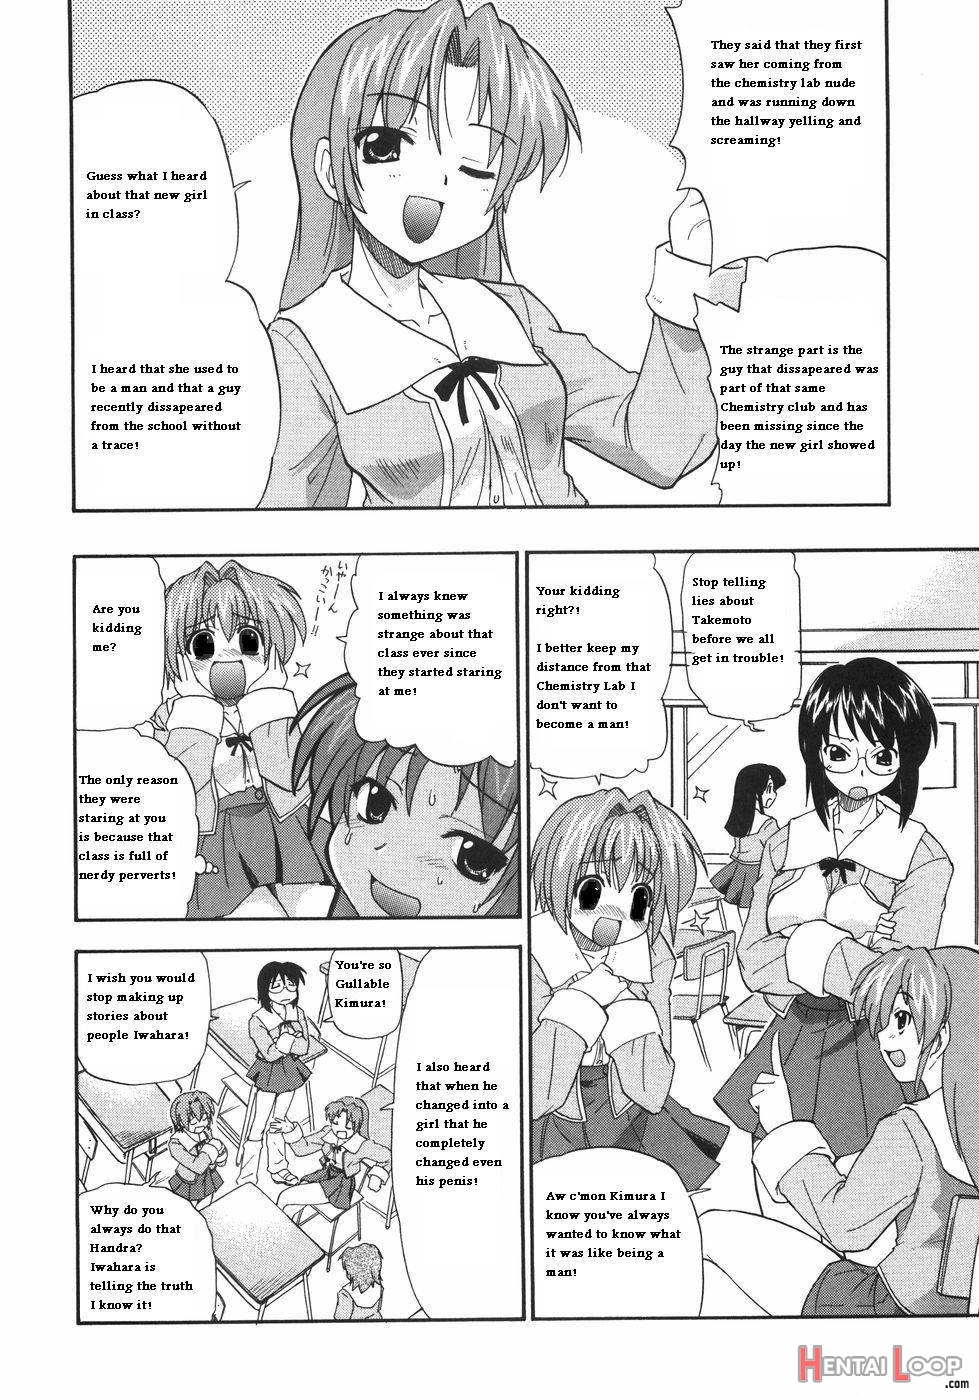 The New Girl page 2